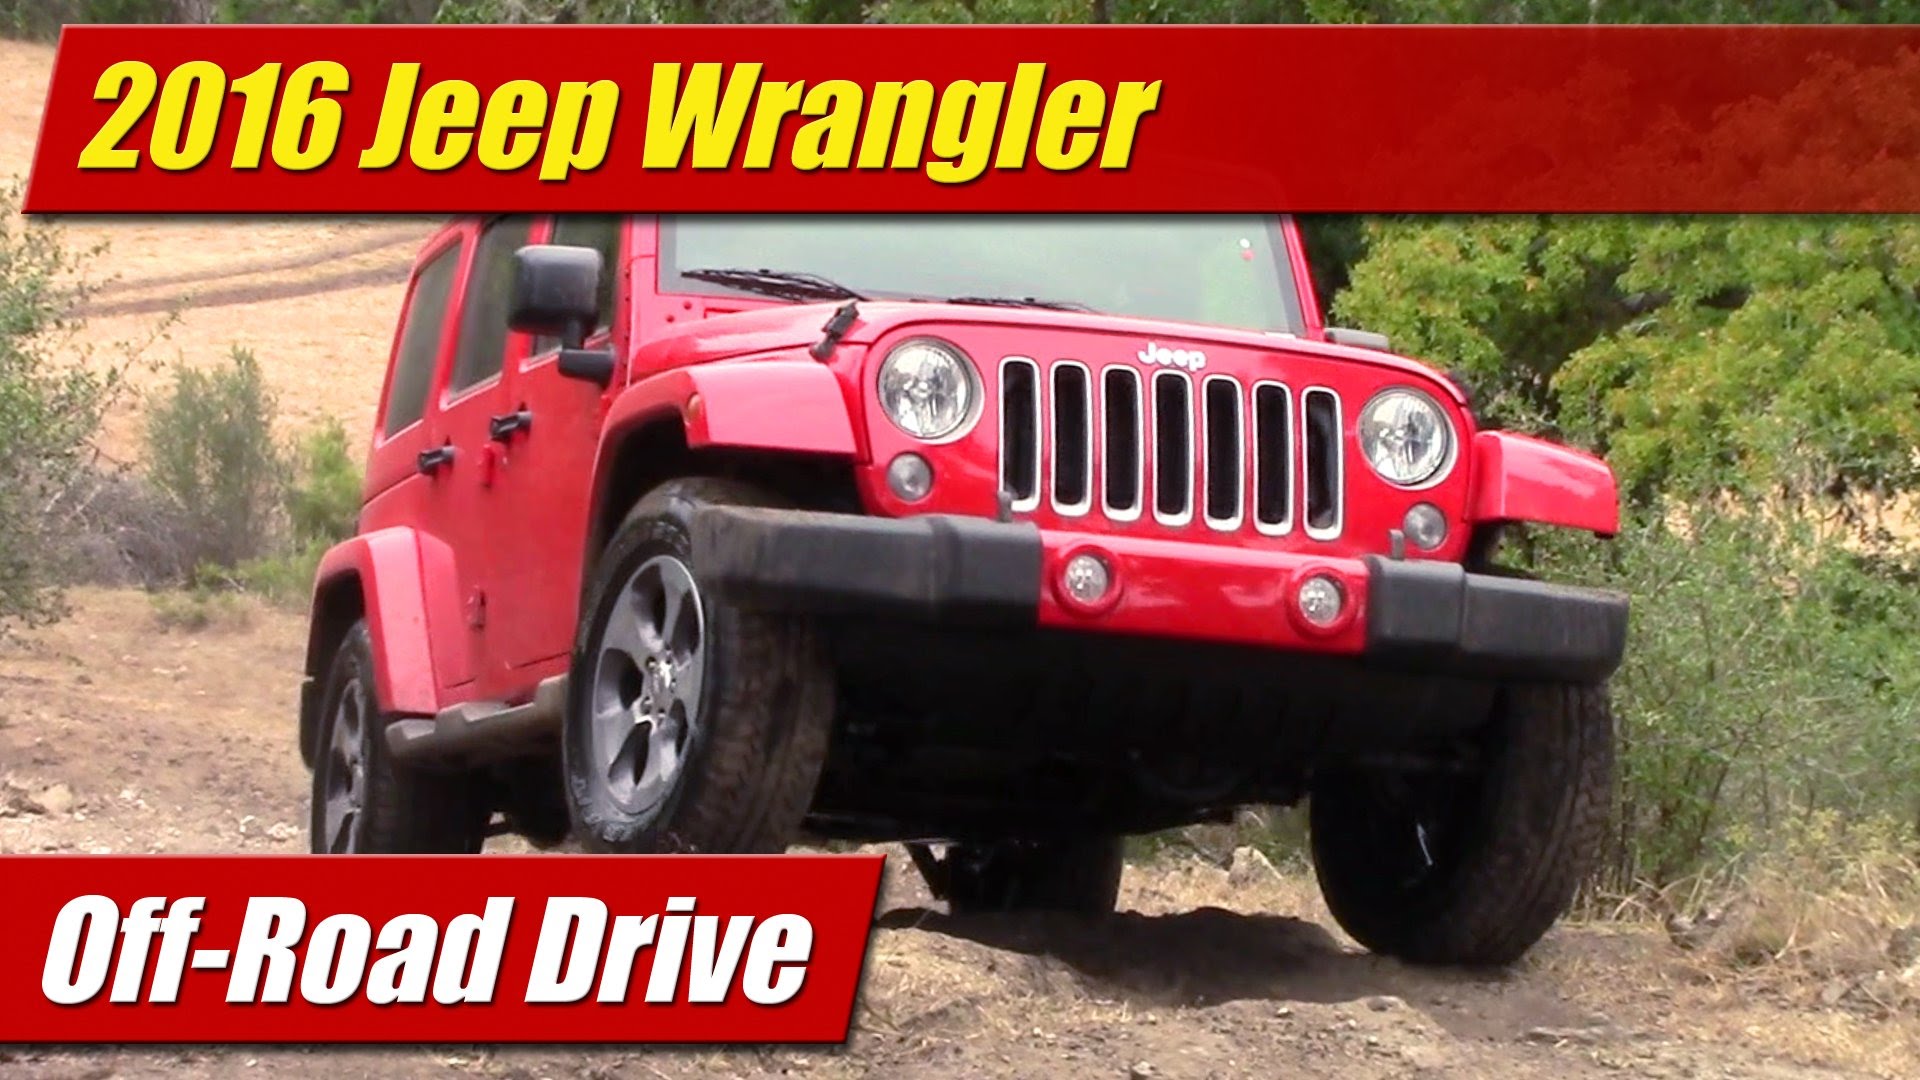 Can the jeep wrangler interior got wet #3